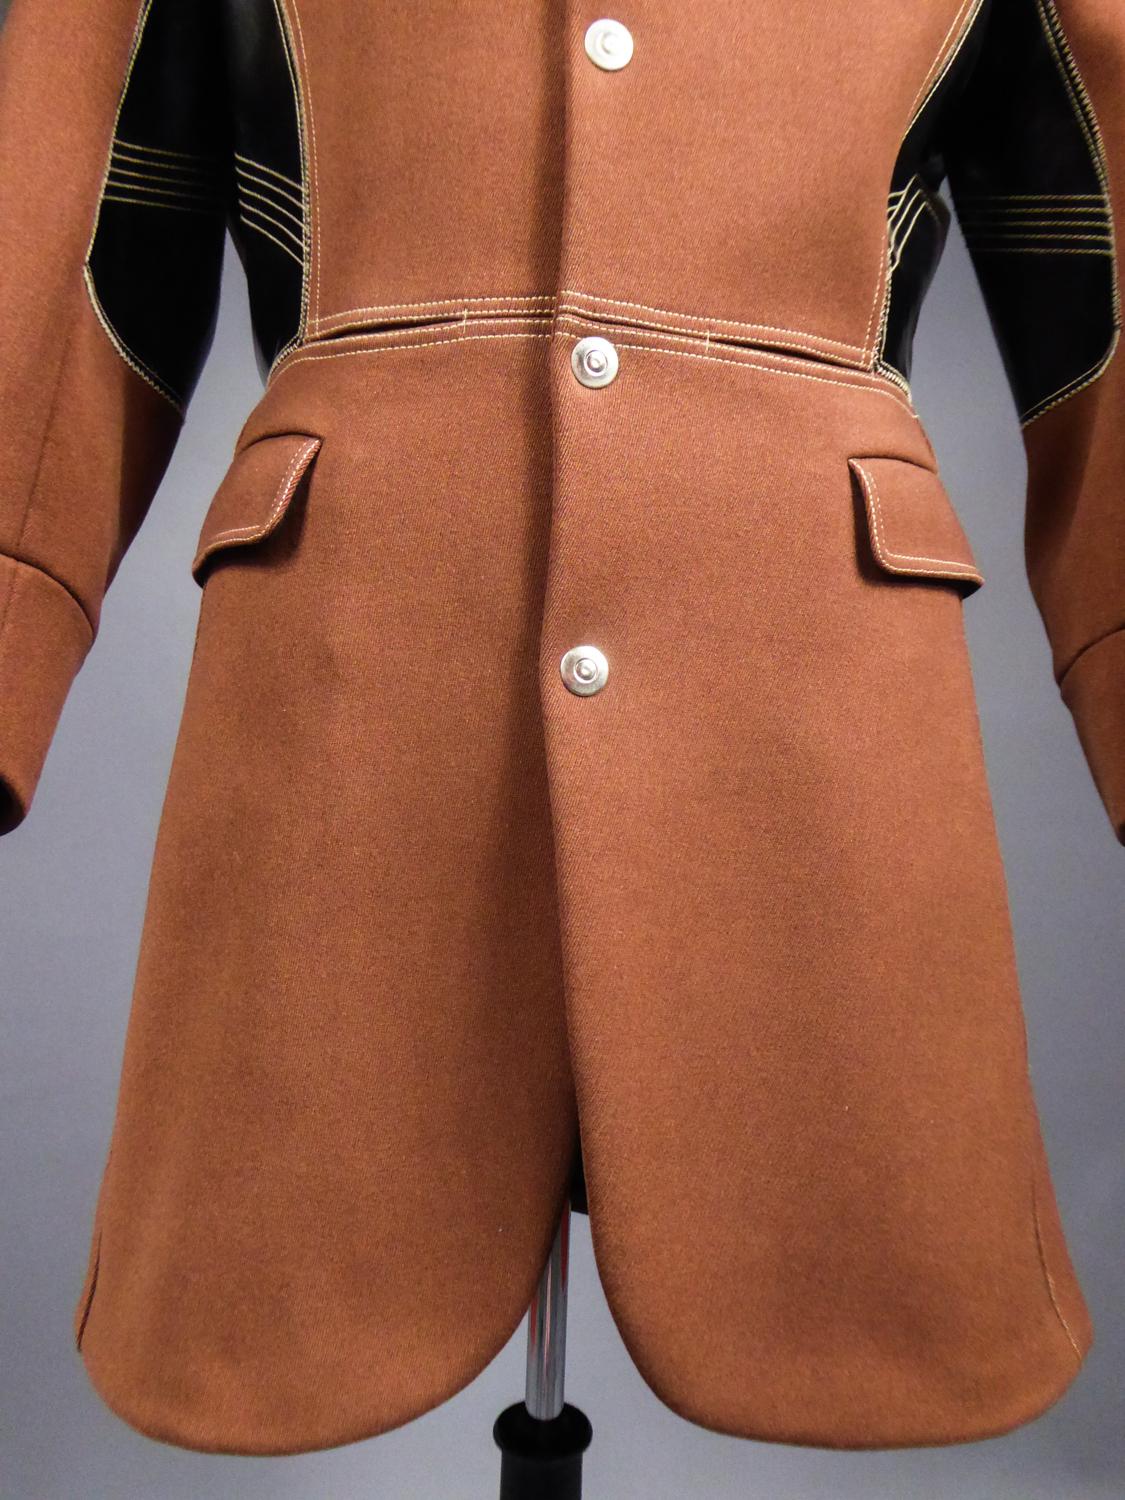 Circa 1990/2000

France

Ample masculine coat signed Jean-Paul Gaultier in thick twill of light brown wool dating from the 1990s. Long-tailed frock coat cut, split back and small officer collar in black velvet. Black vinyl panels on the sides, and